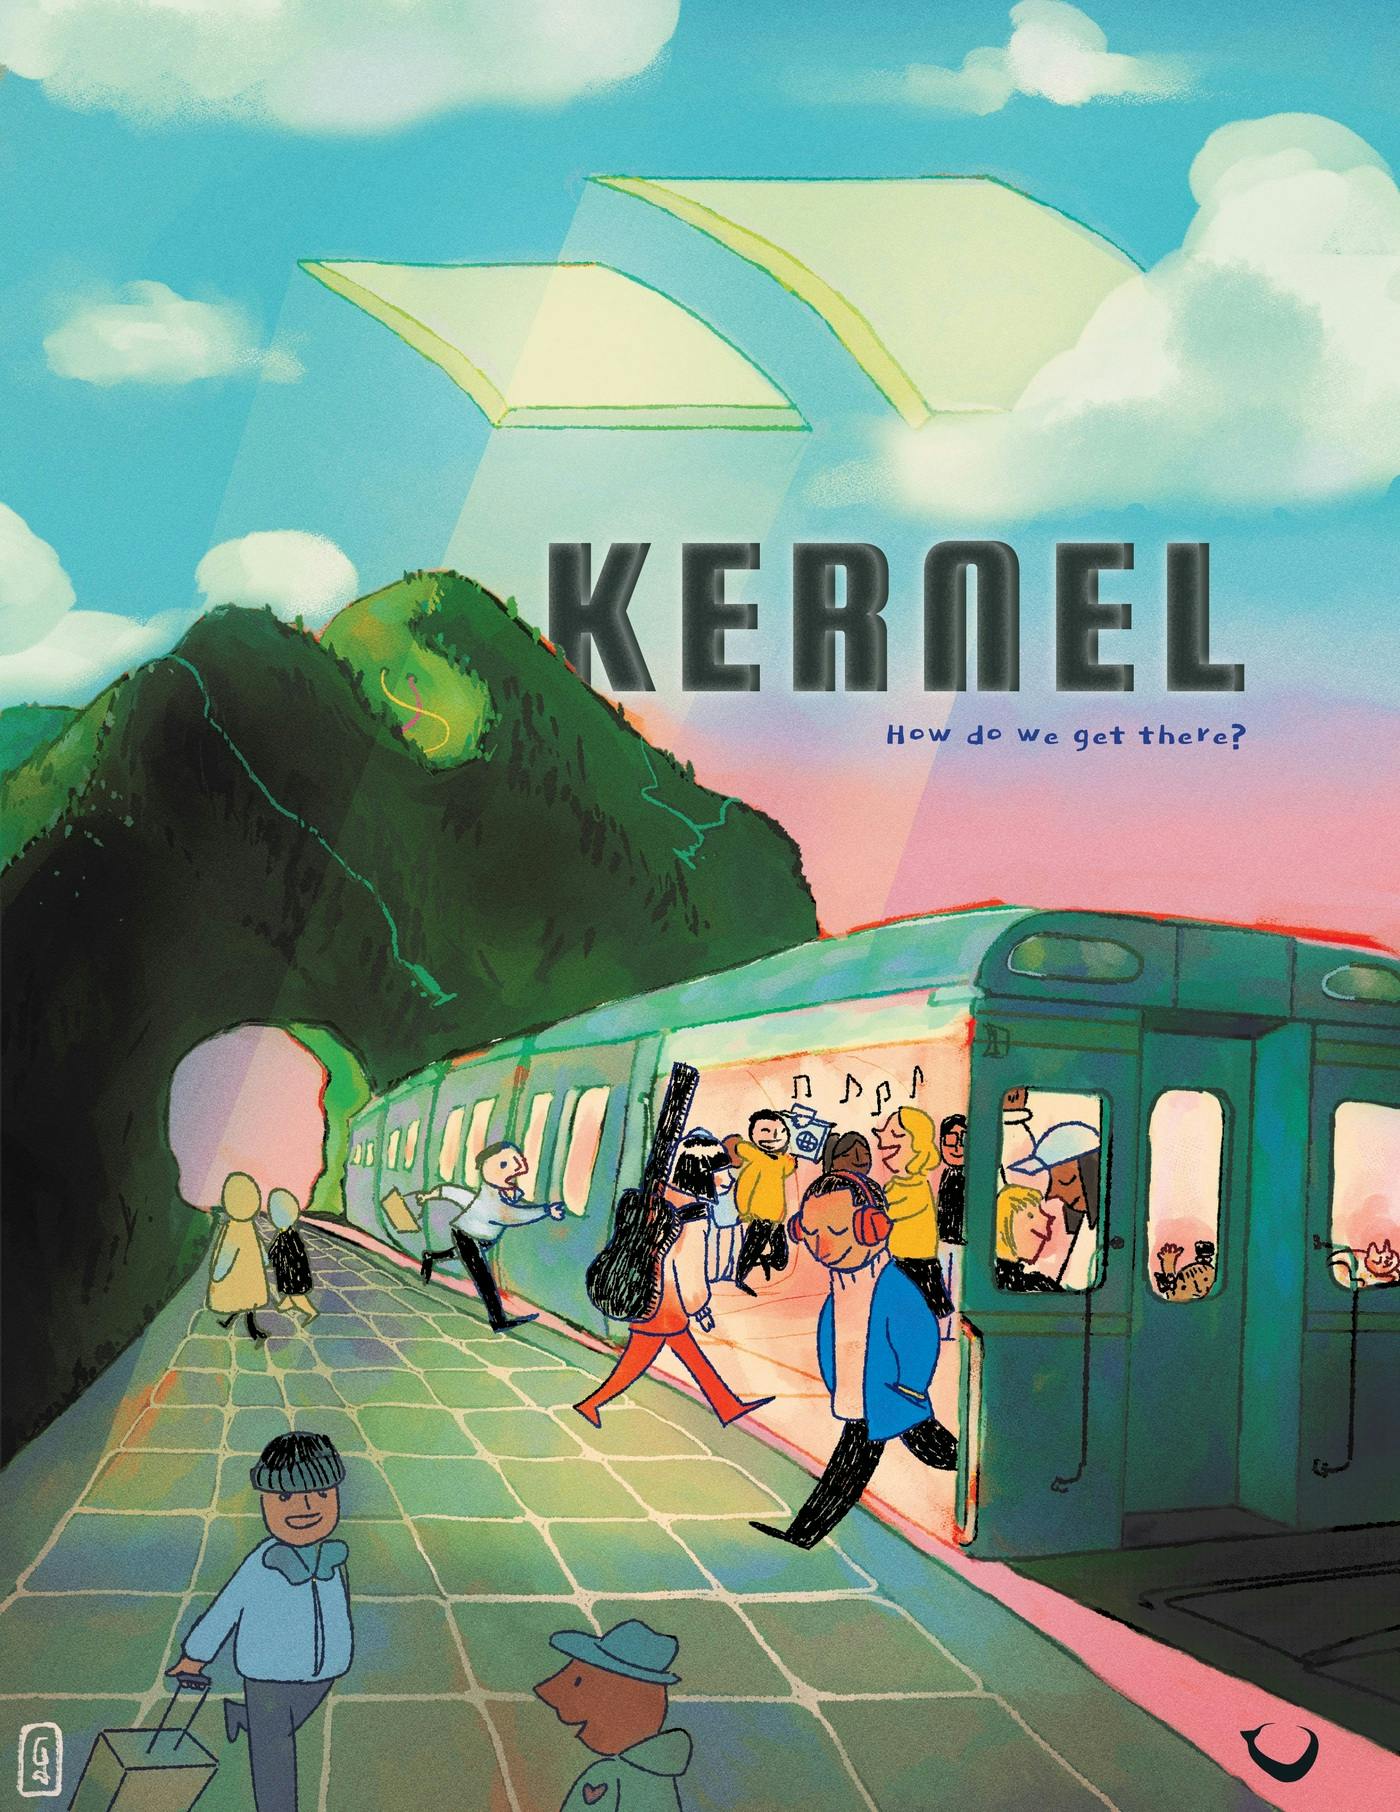 Cover image art for issue 3 of Kernel Magaizne. There is a clock in the centered that's painted in a purplish hue with small people milling about on the top and bottom. The arrows are jutting out into the rest of it and Kernel is written on the top in big letters in a serif font.